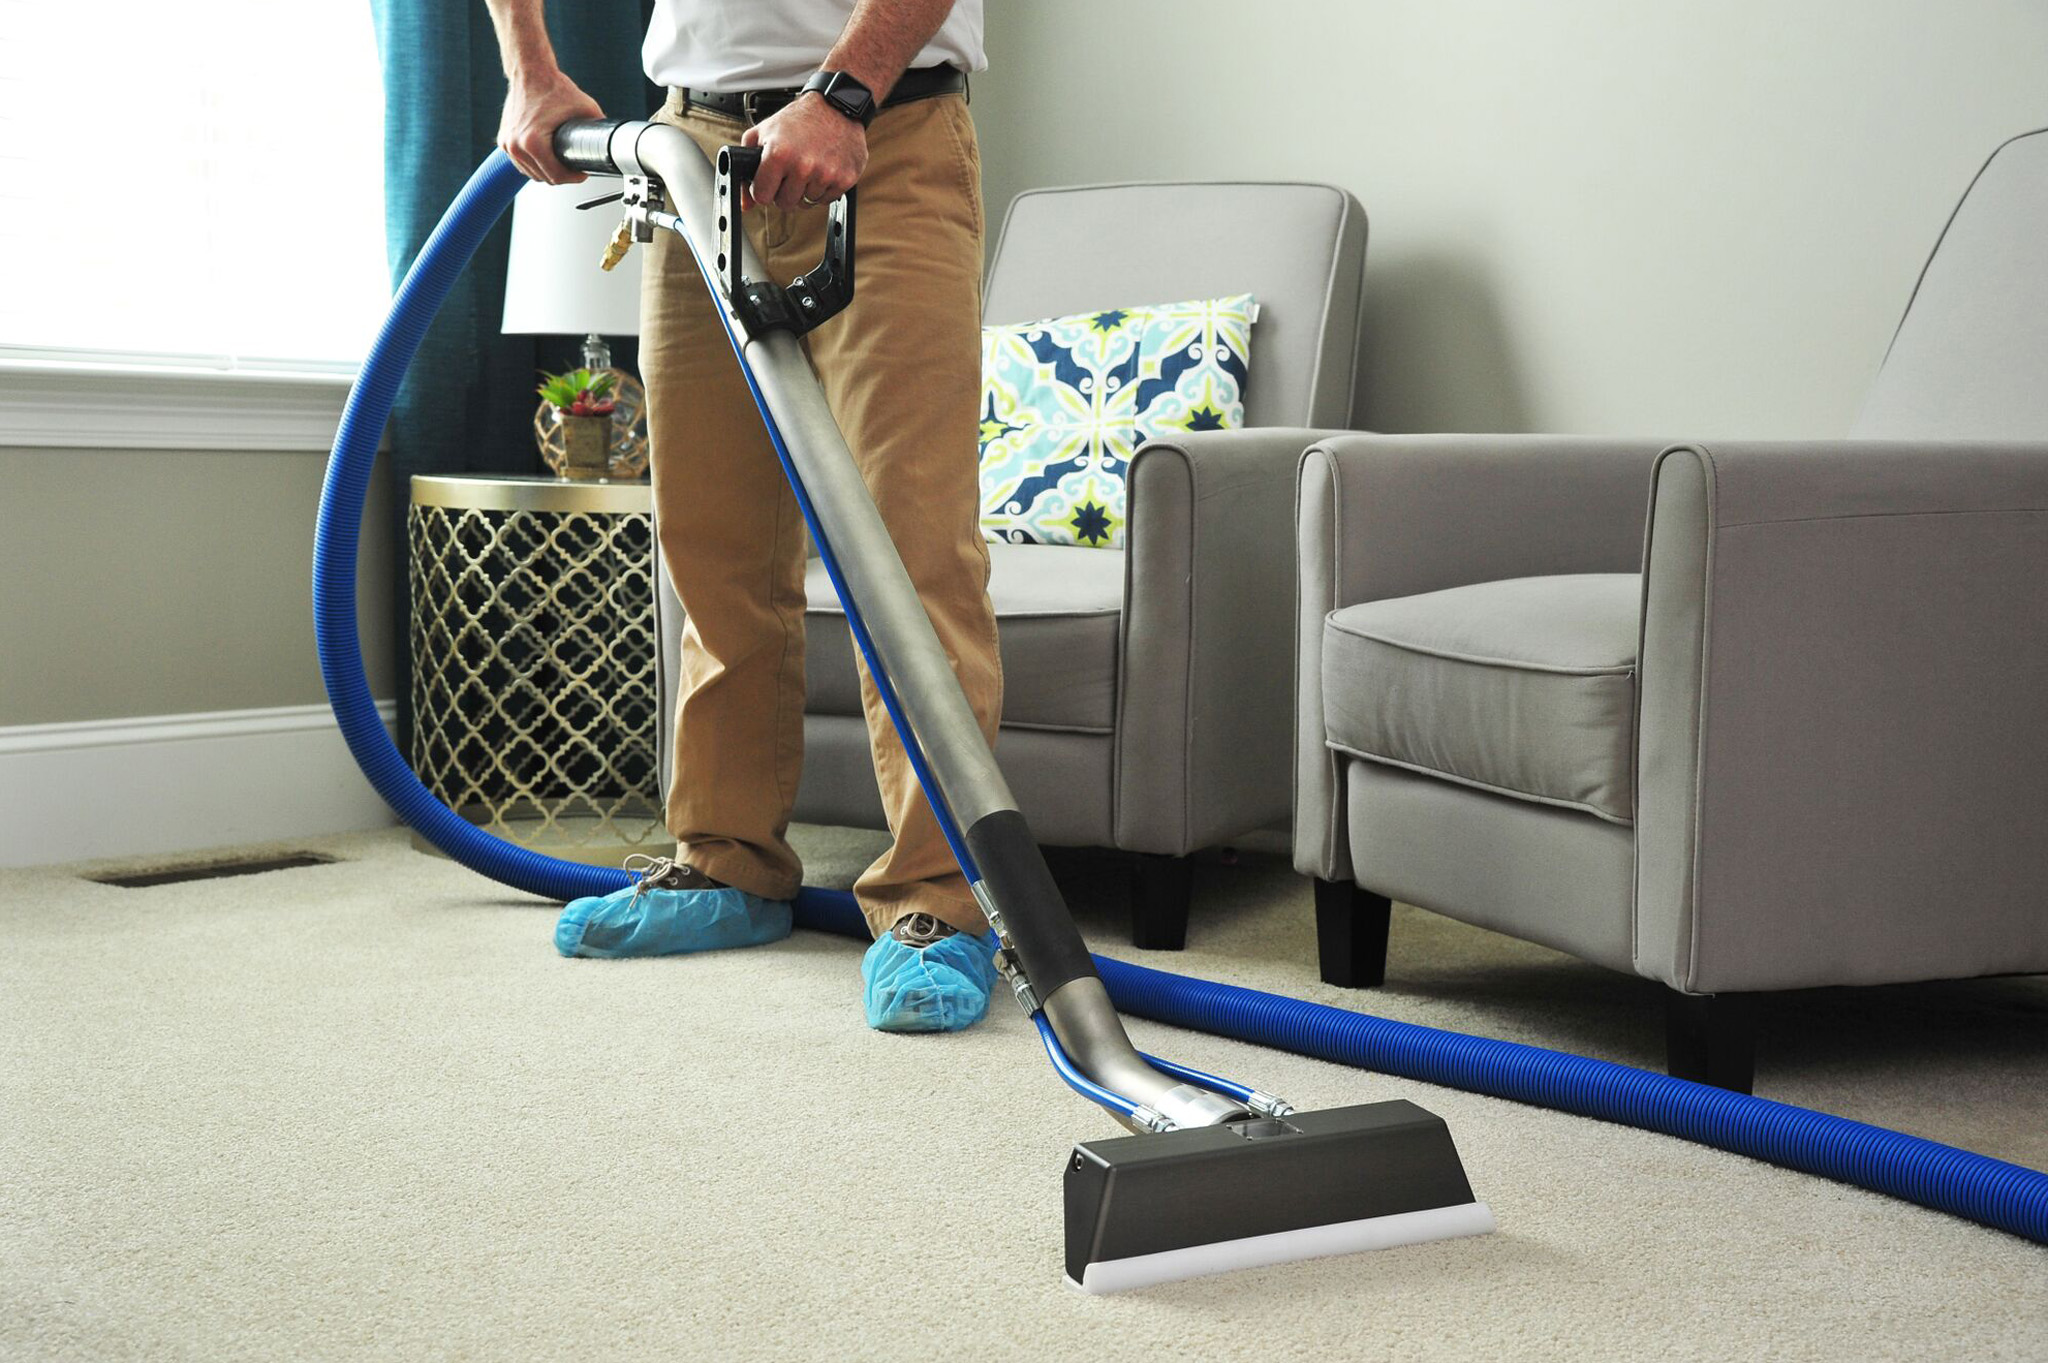 Professional carpet cleaner cleaning carpets in a home.